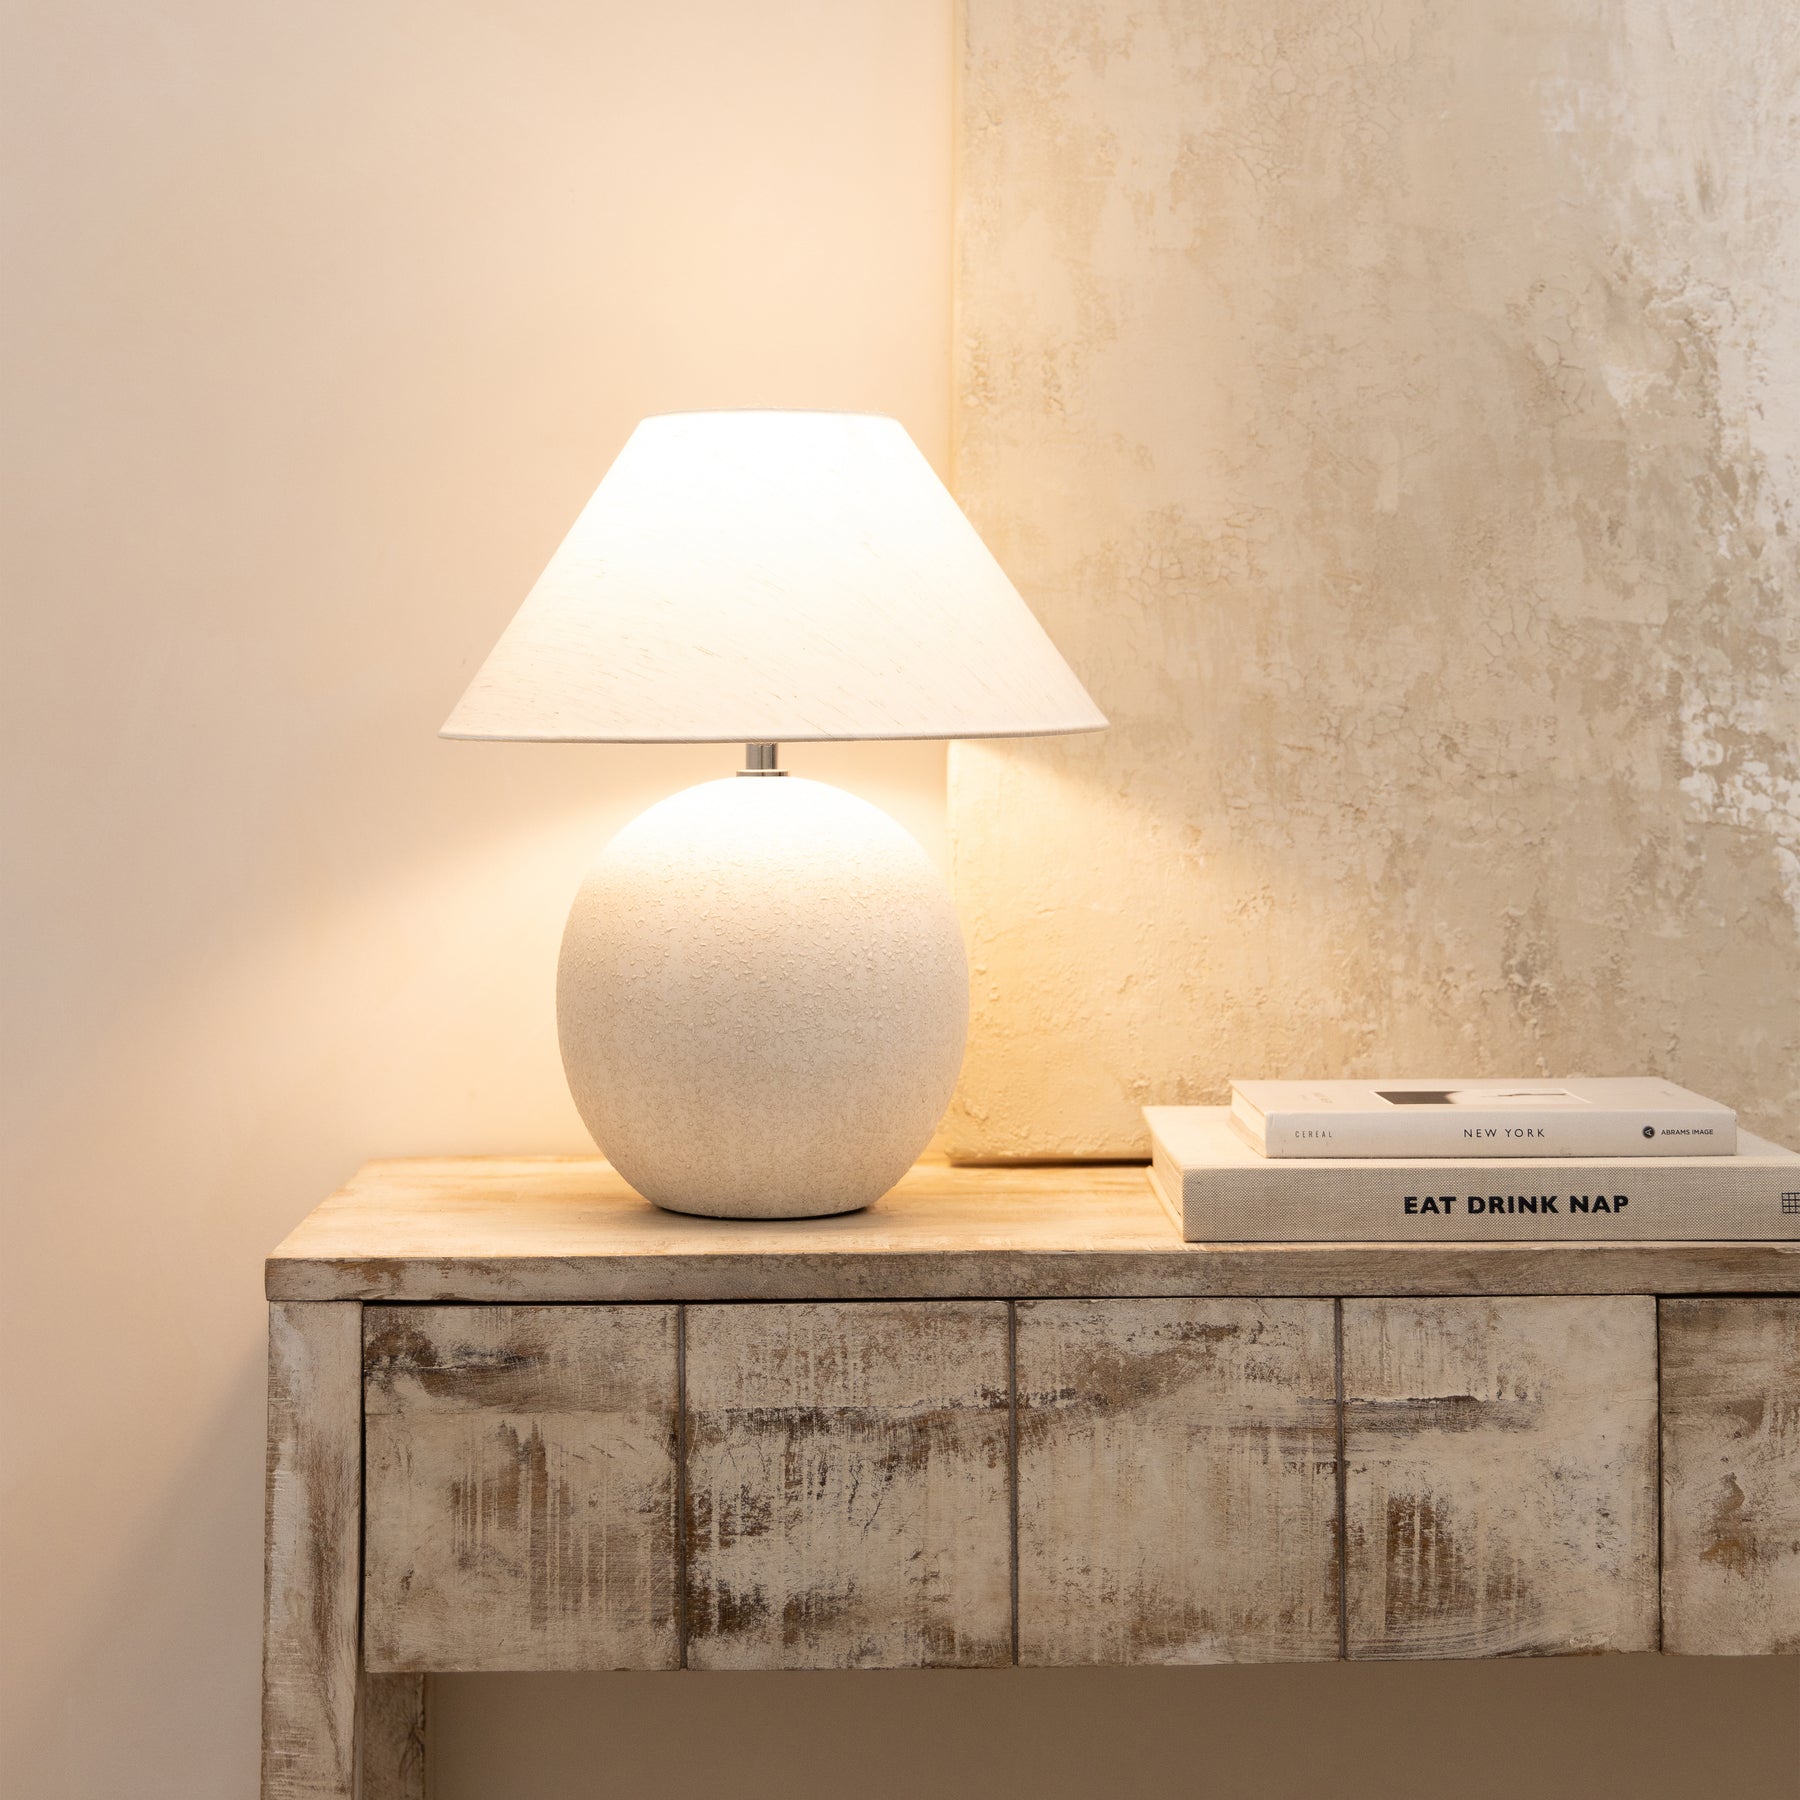 Stone ceramic coolie shade table lamp on console table emitting warm lighting